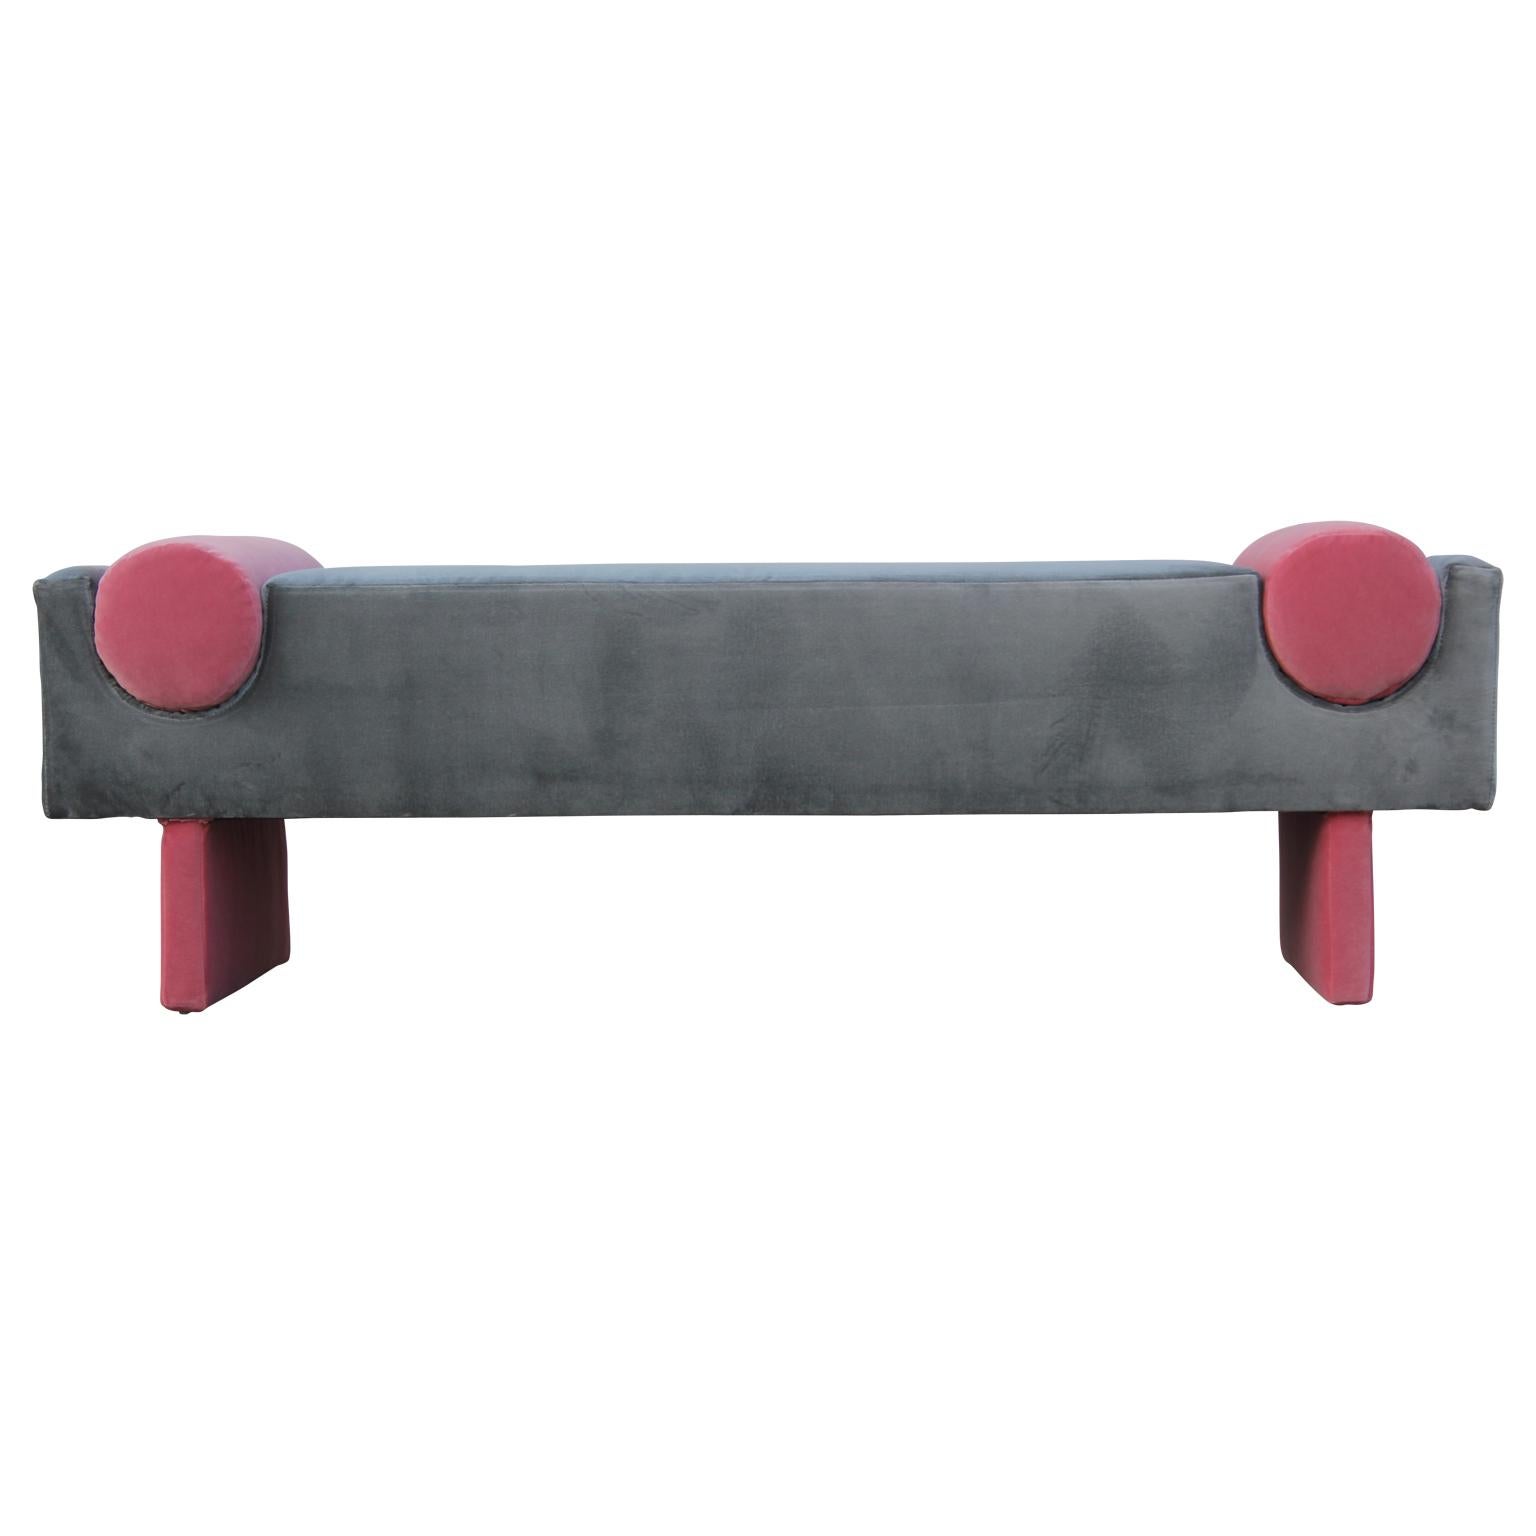 Custom-made bench upholstered in a rich dark grey velvet with pink velvet legs and matching pink velvet bolster accents that are attached.